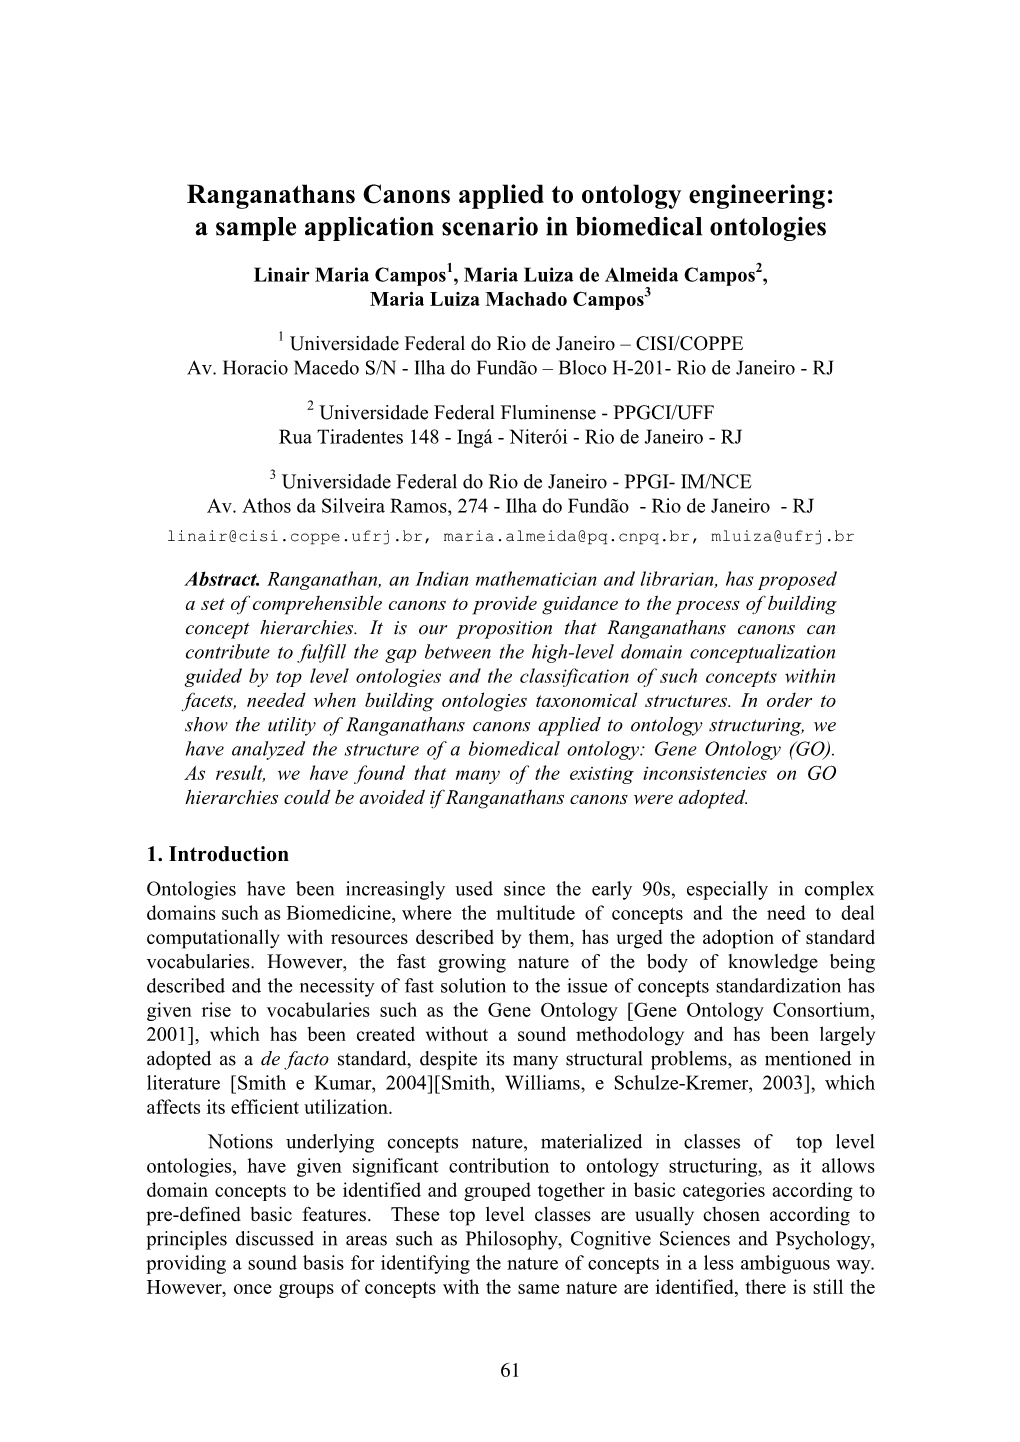 Ranganathans Canons Applied to Ontology Engineering: a Sample Application Scenario in Biomedical Ontologies